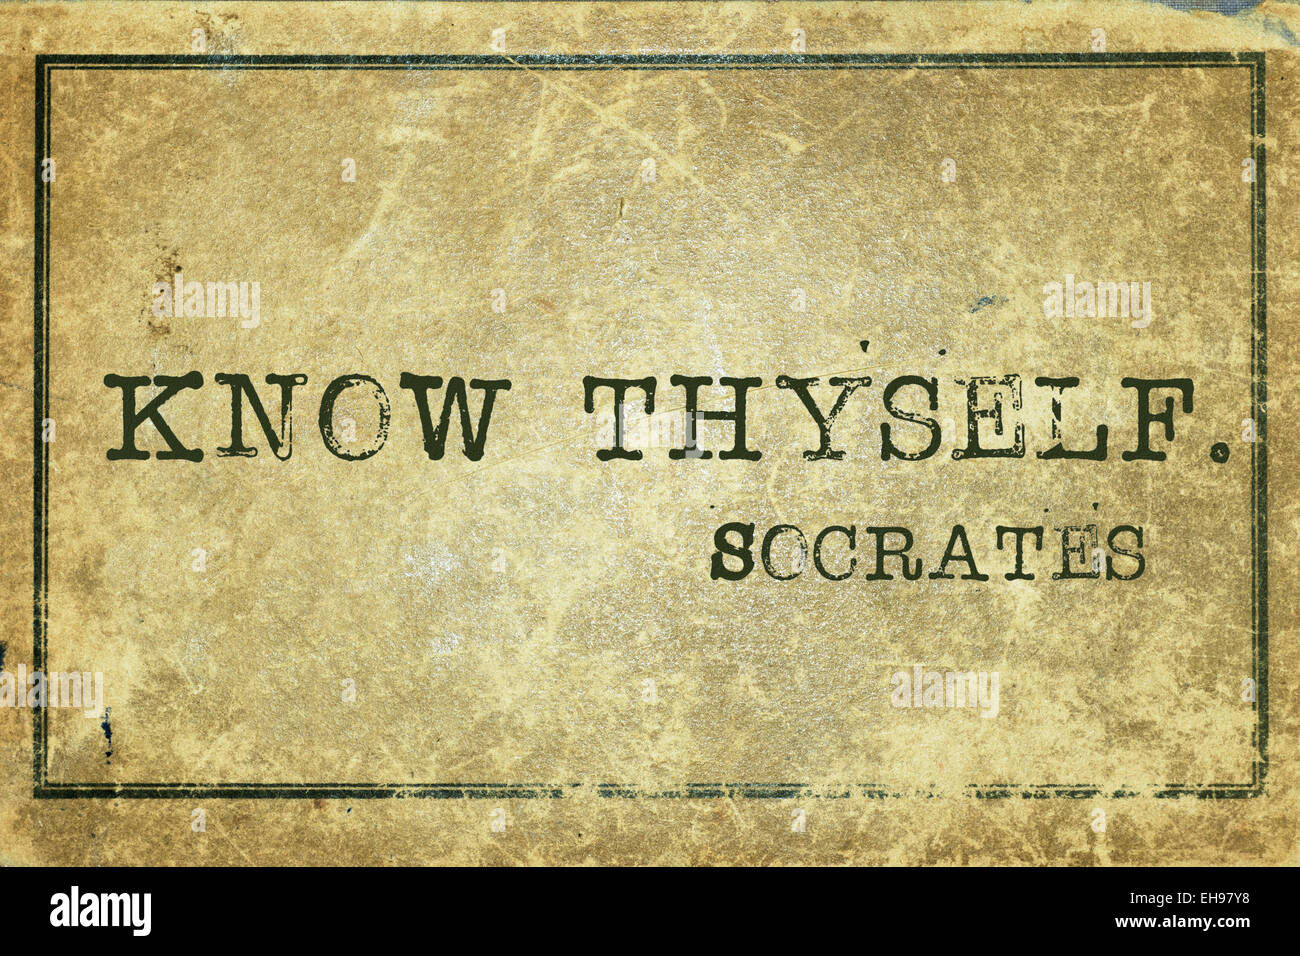 know thyself - ancient Greek philosopher Socrates quote printed on grunge vintage cardboard Stock Photo